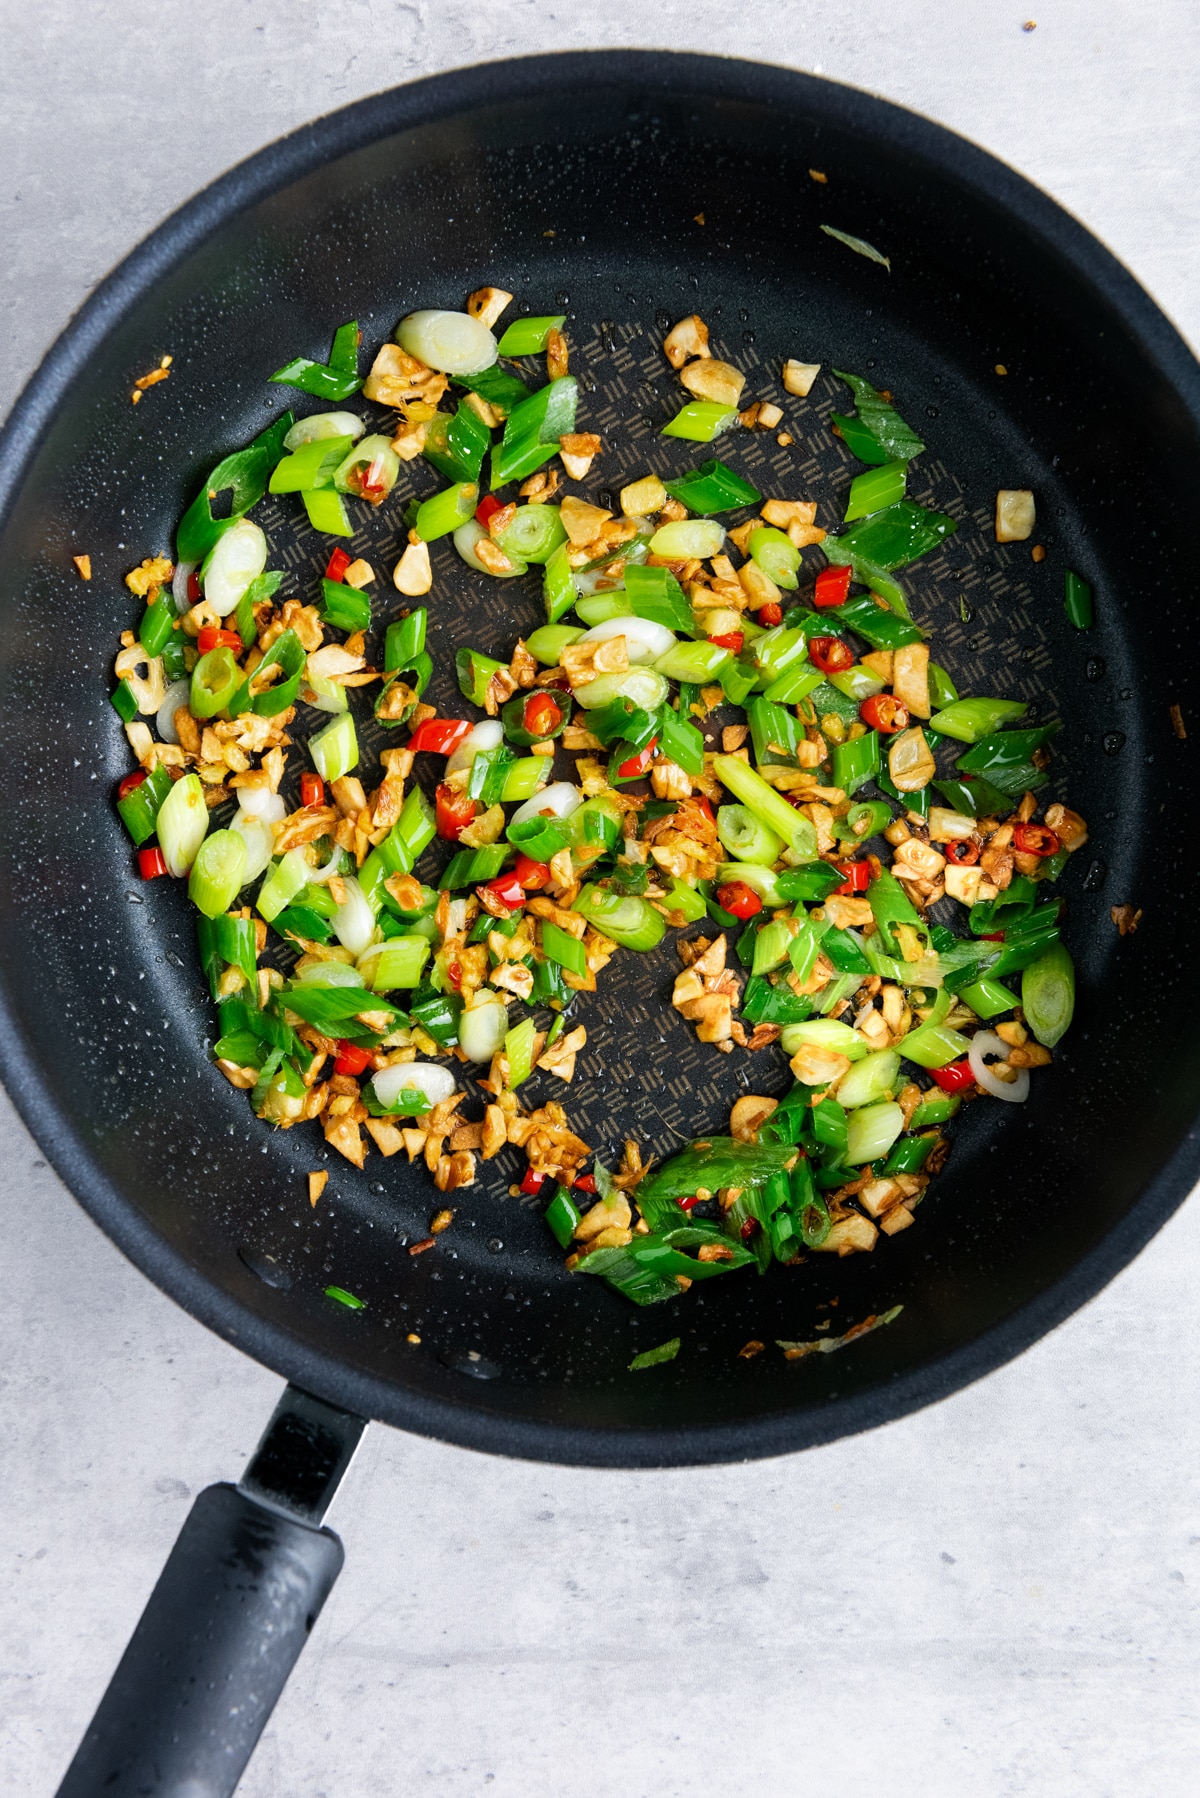 Peppers, scallions, ginger, and garlic being sautéed in a frying pan.